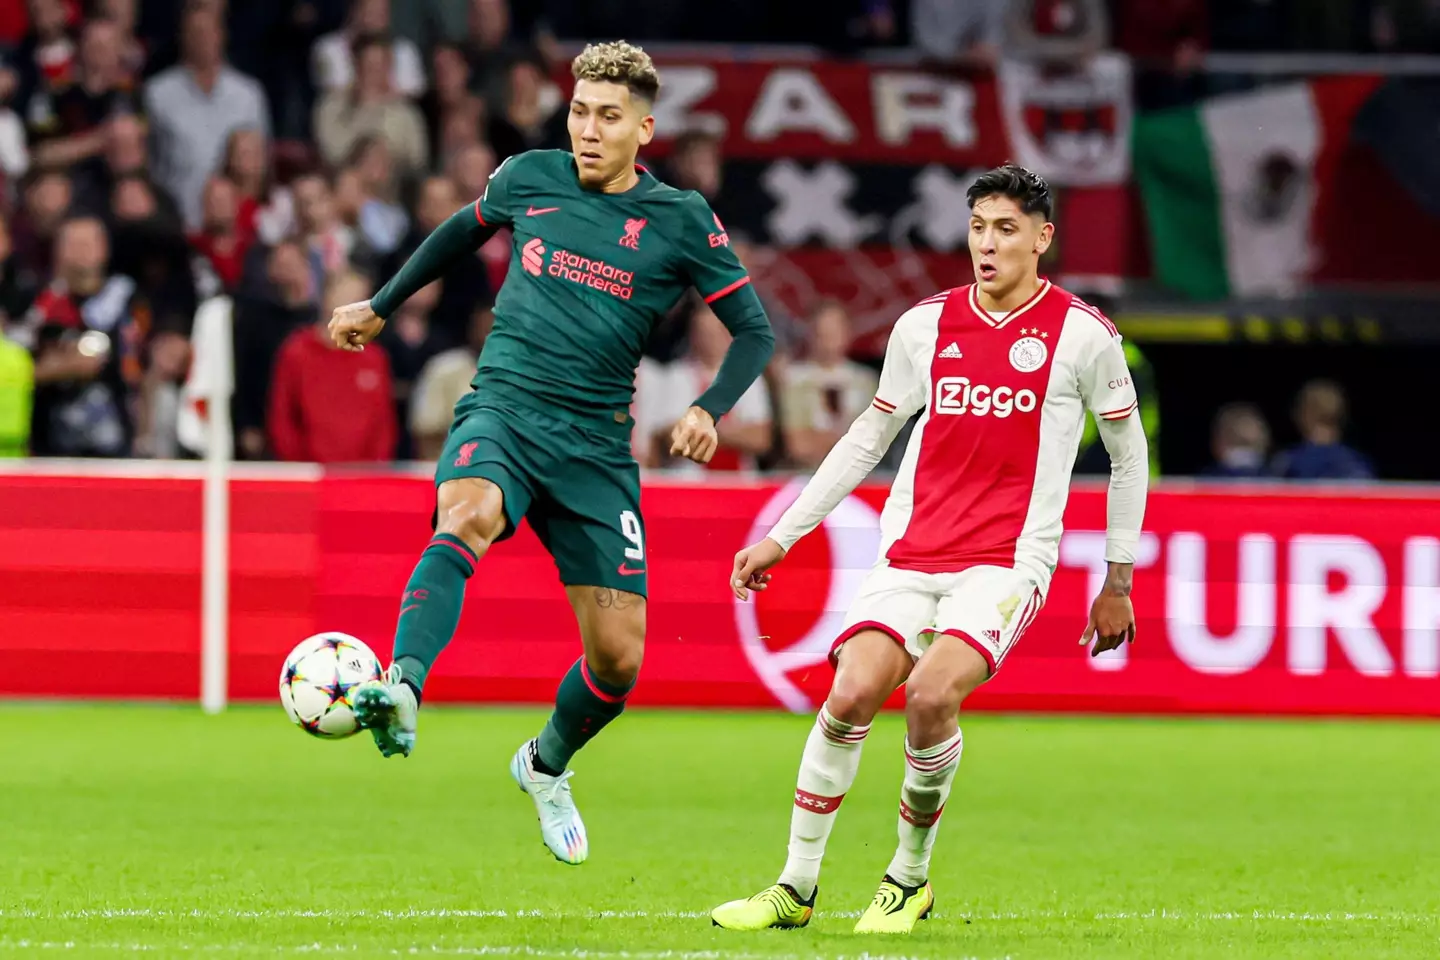 Roberto Firmino pictured in Champions League action for Liverpool (